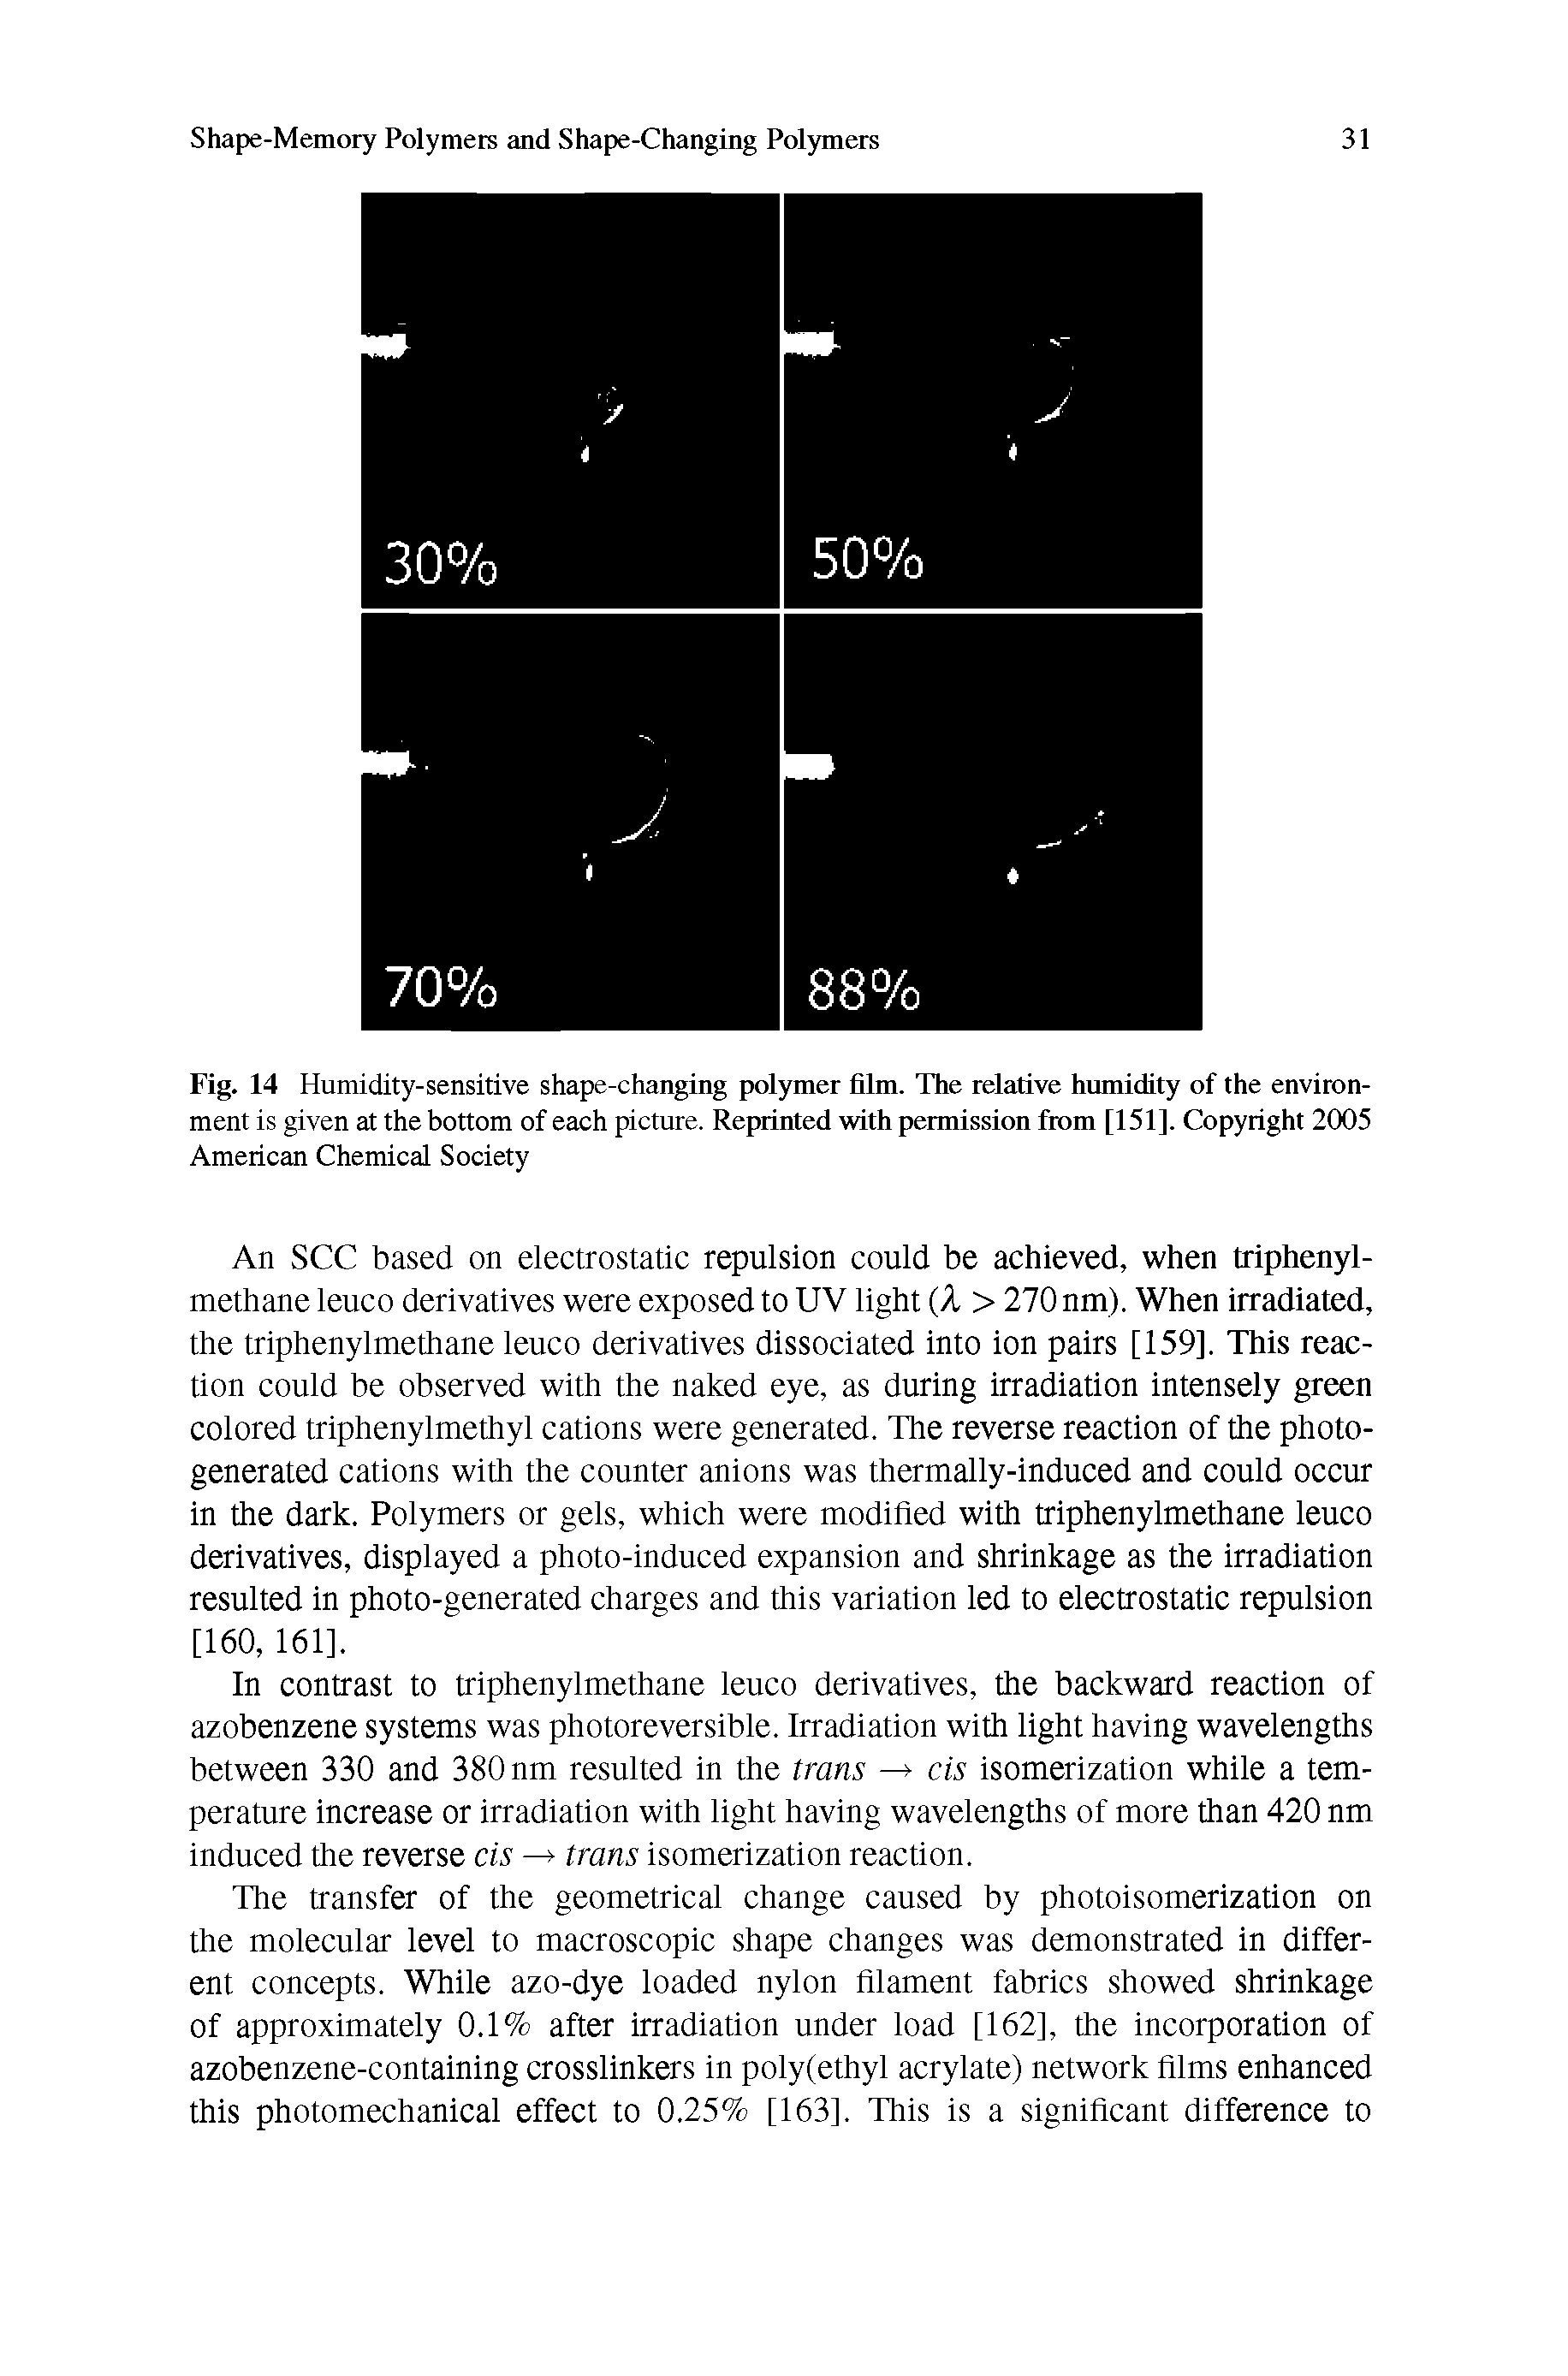 Fig. 14 Humidity-sensitive shape-changing polymer film. The relative humidity of the environment is given at the bottom of each picture. Reprinted with permission from [151]. Copyright 2005 American Chemical Society...